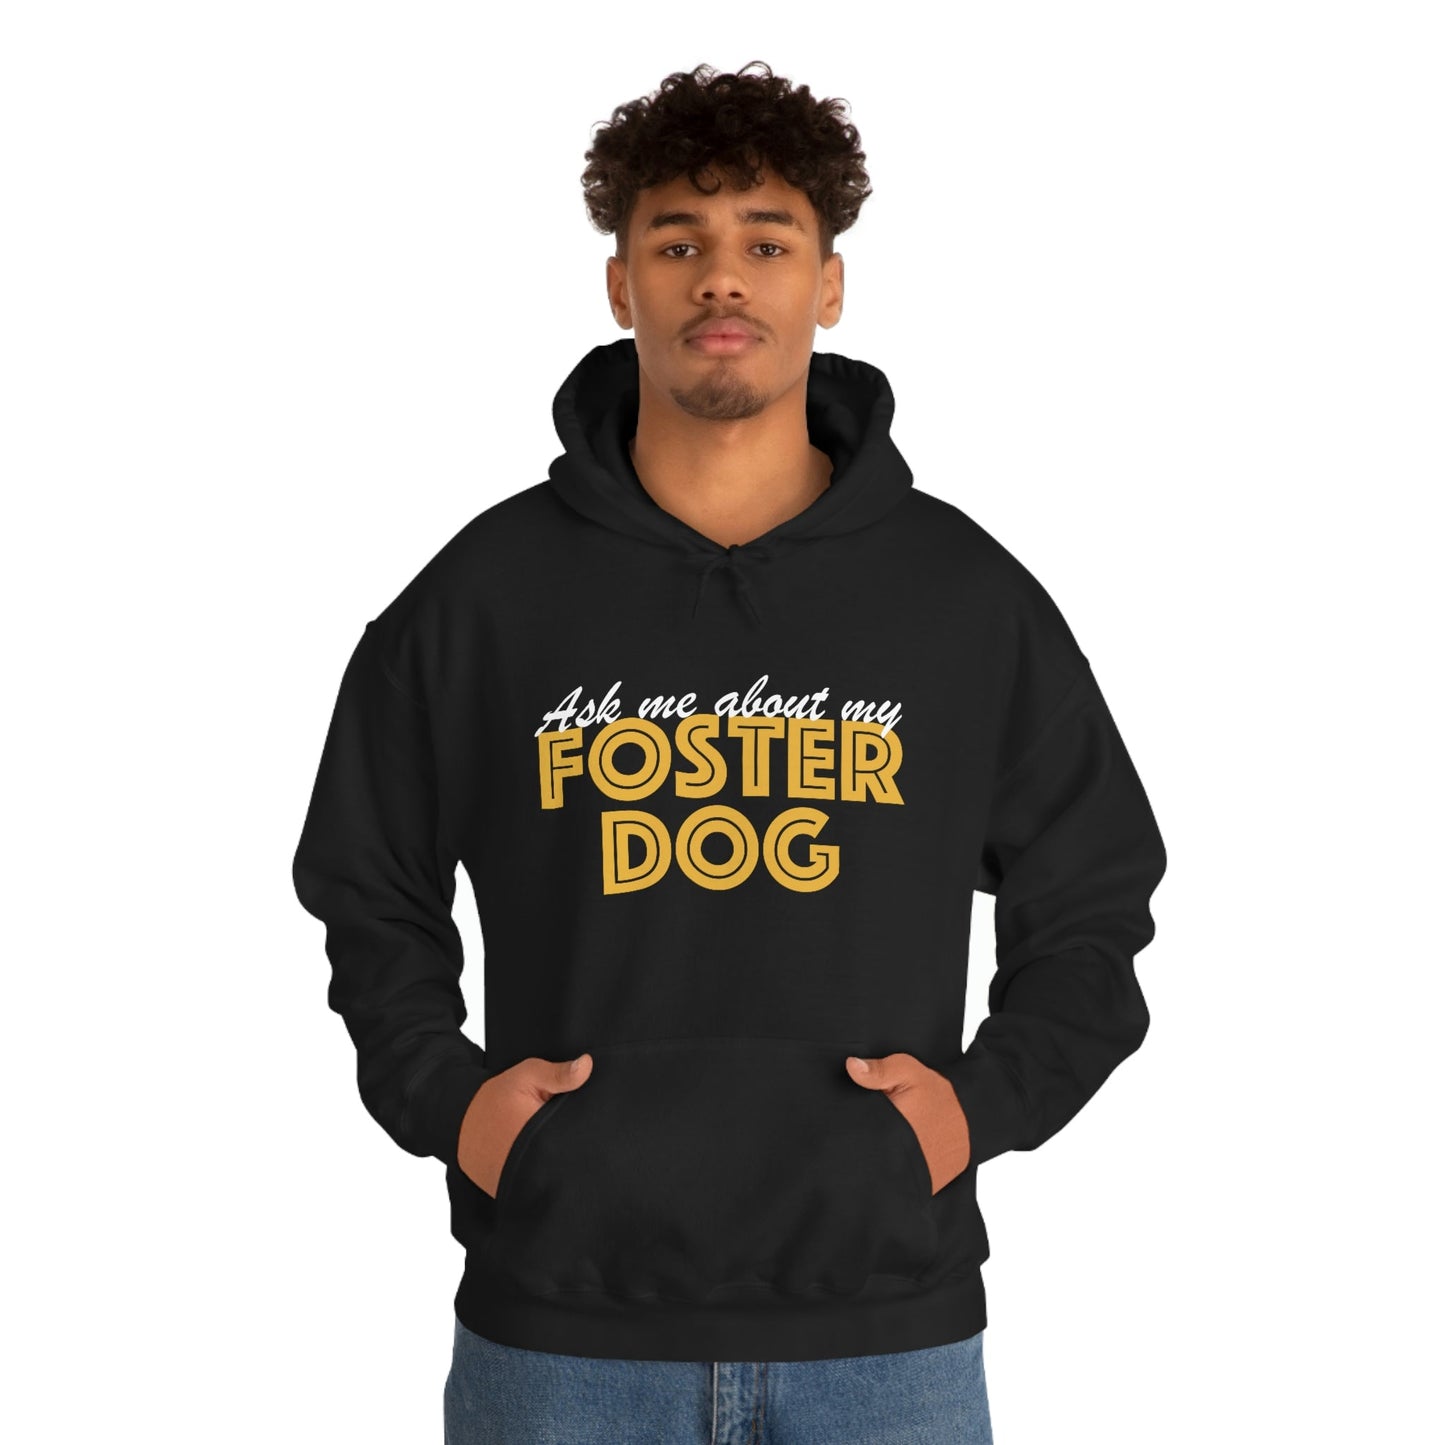 Ask Me About My Foster Dog | Hooded Sweatshirt - Detezi Designs-17245315581400727290